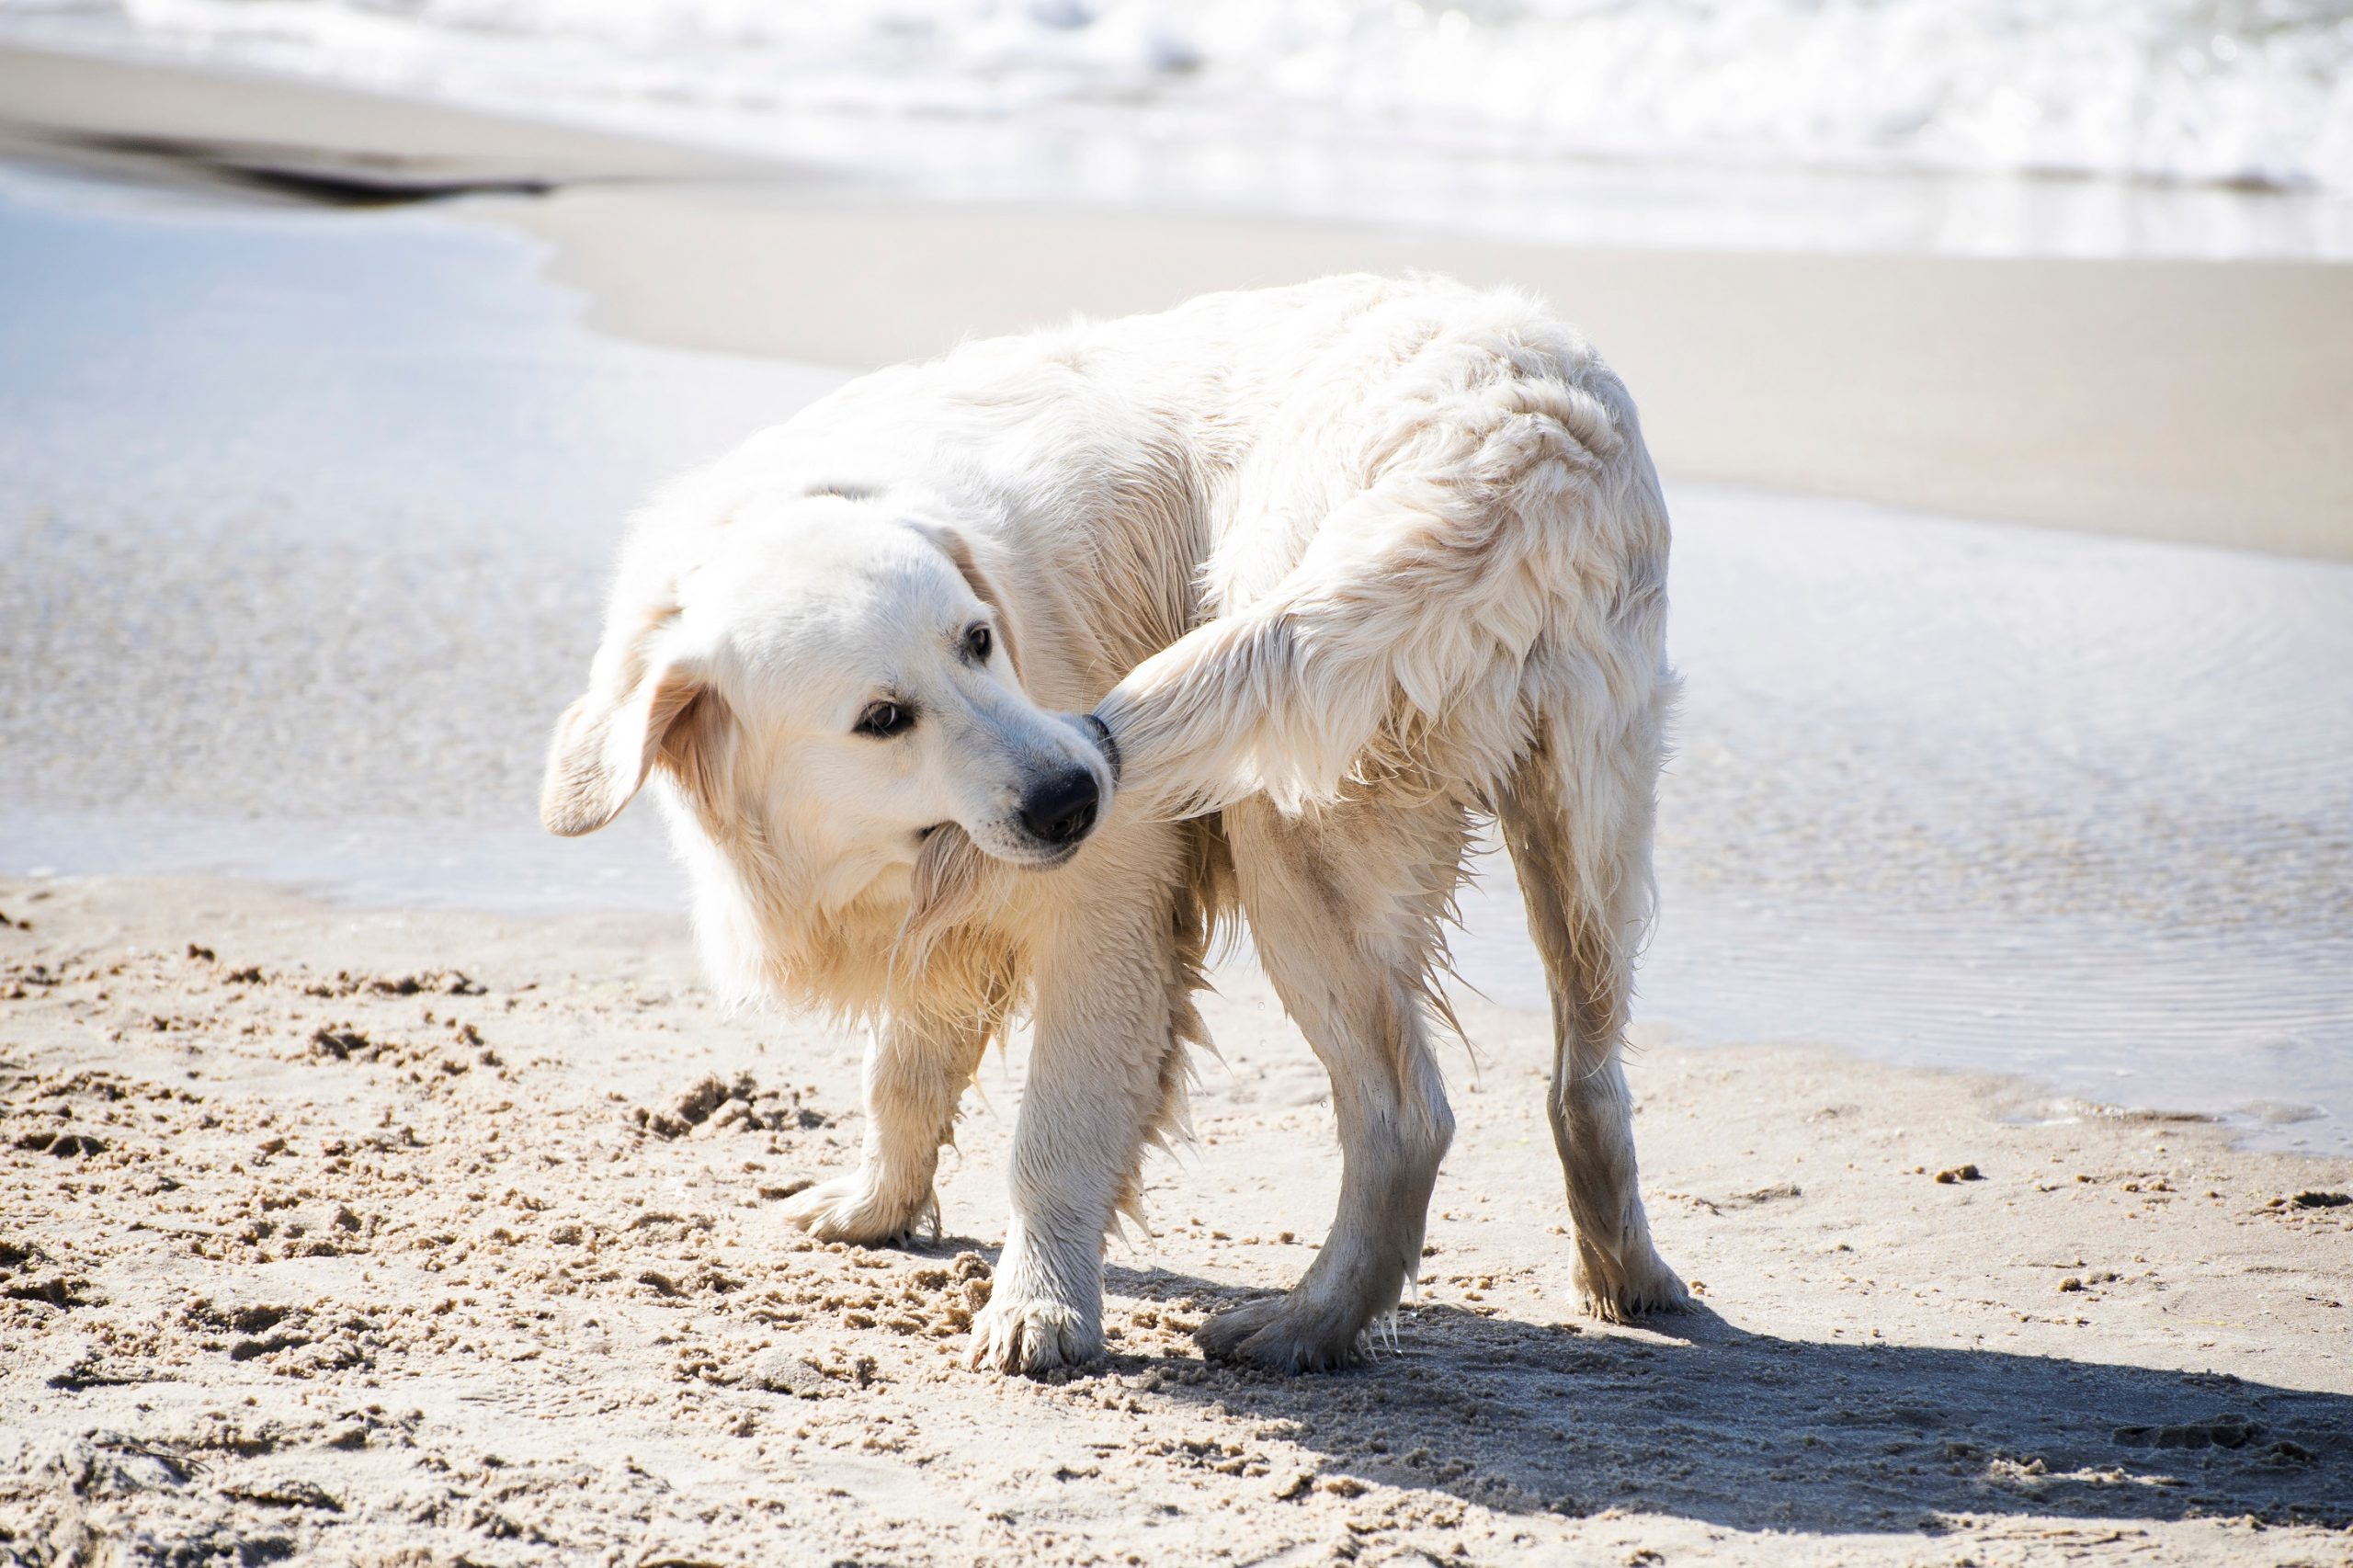 Dog chasing tail on beach